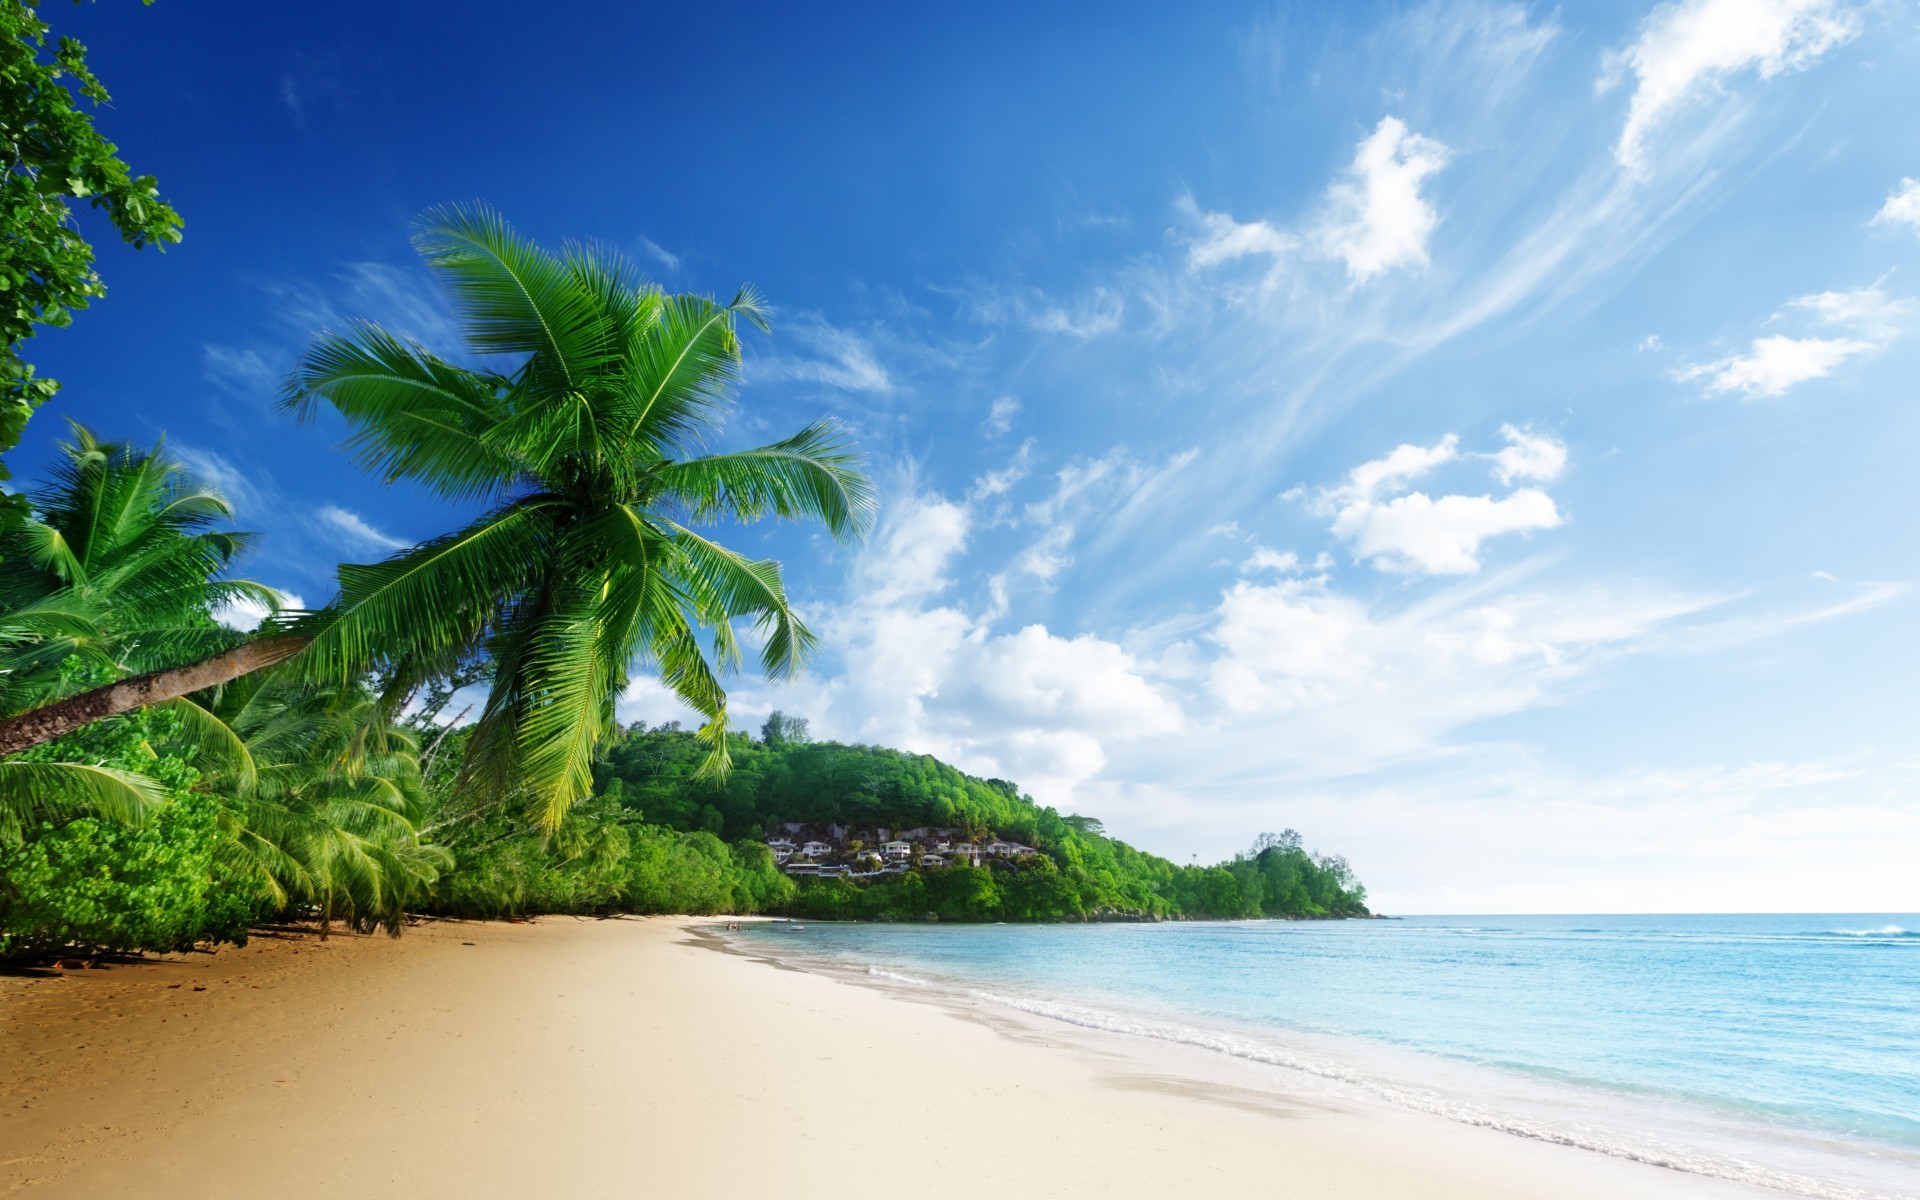 1920x1200 Nature scenery sea beach sky clouds palm trees ocean tropical wallpaper |   | 71549 | WallpaperUP